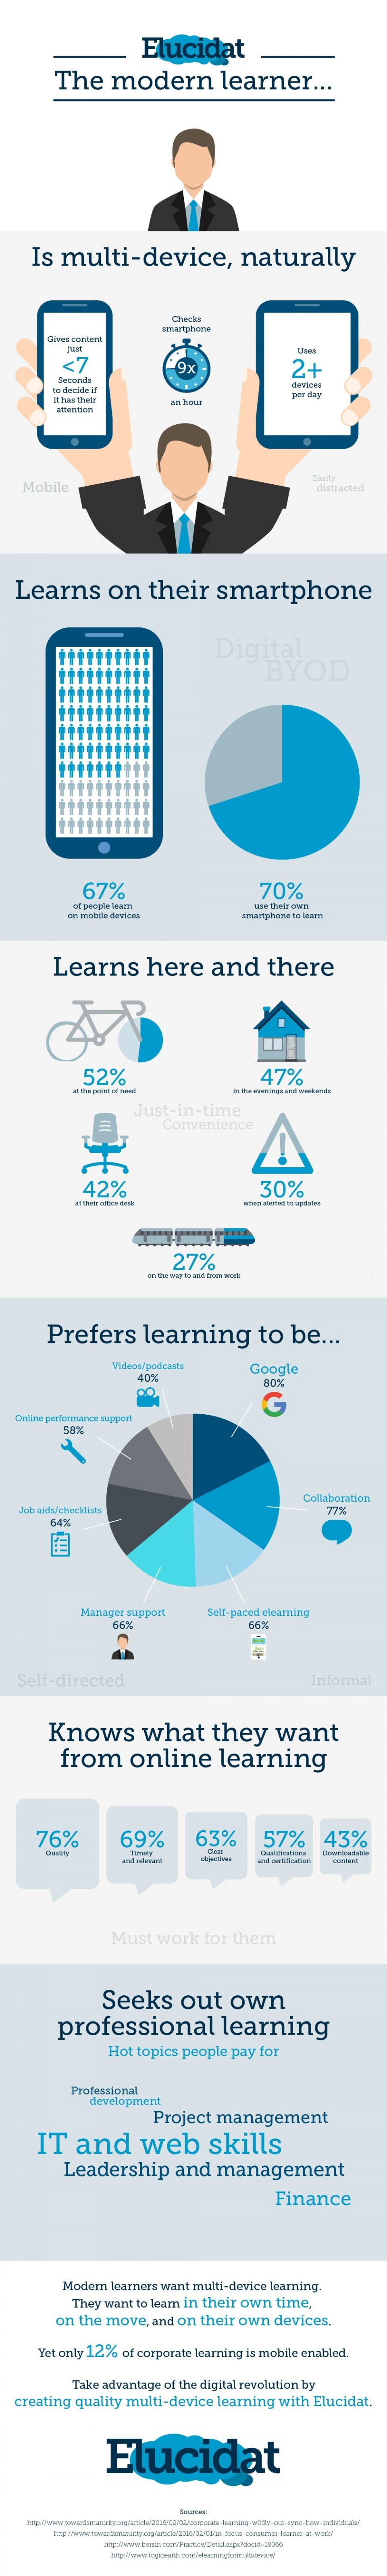 Profile of the Modern Learner Infographic